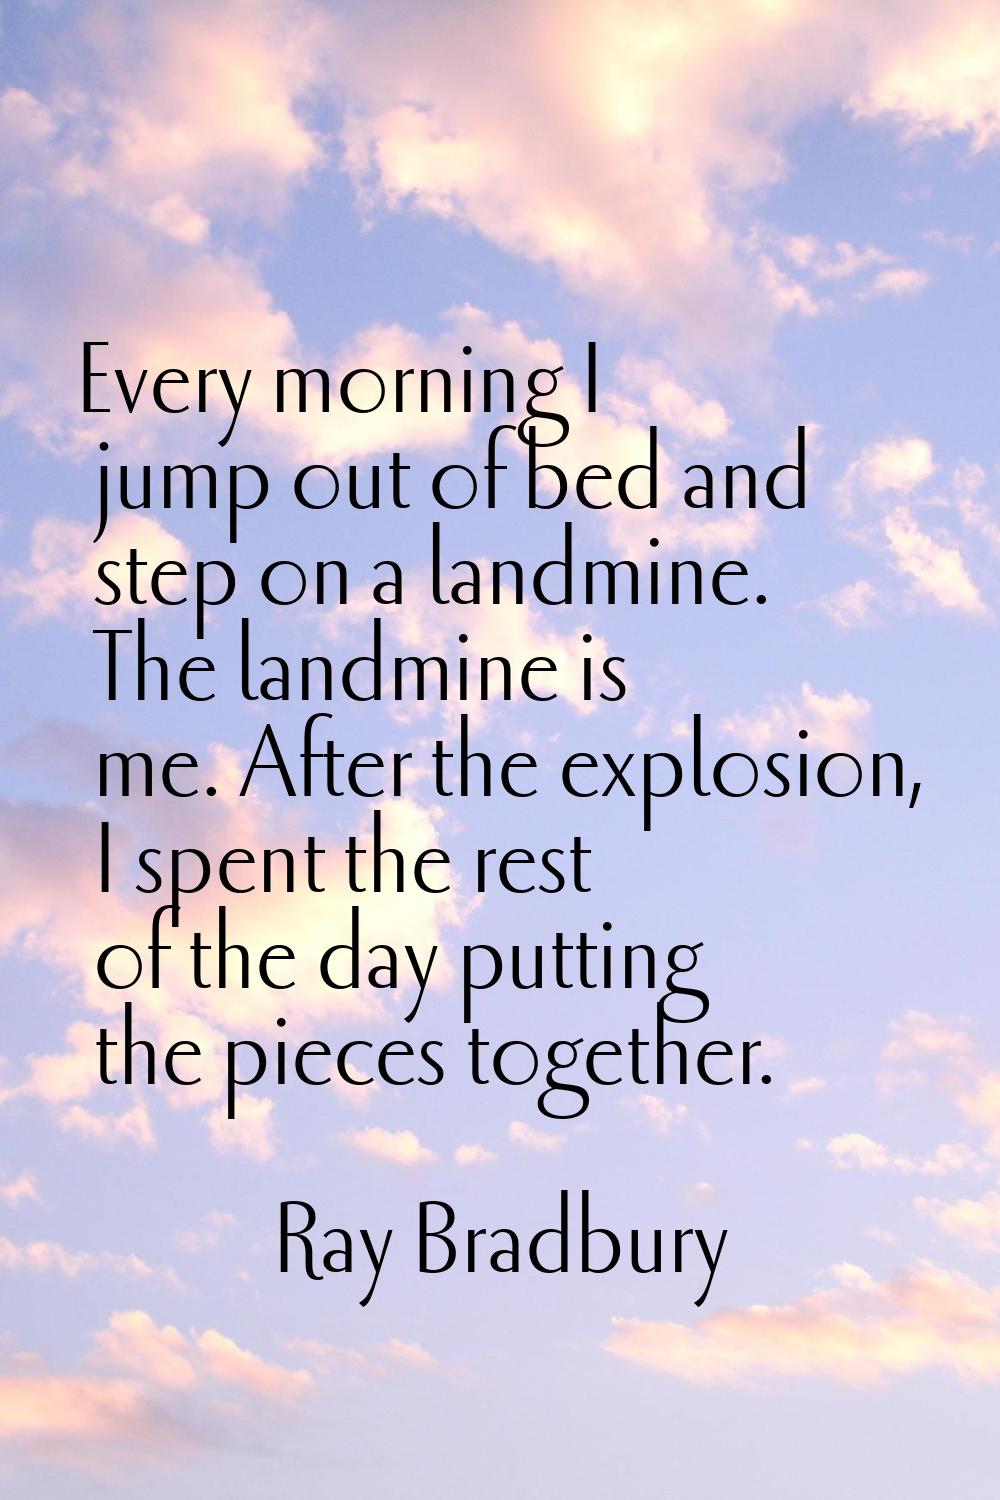 Every morning I jump out of bed and step on a landmine. The landmine is me. After the explosion, I 